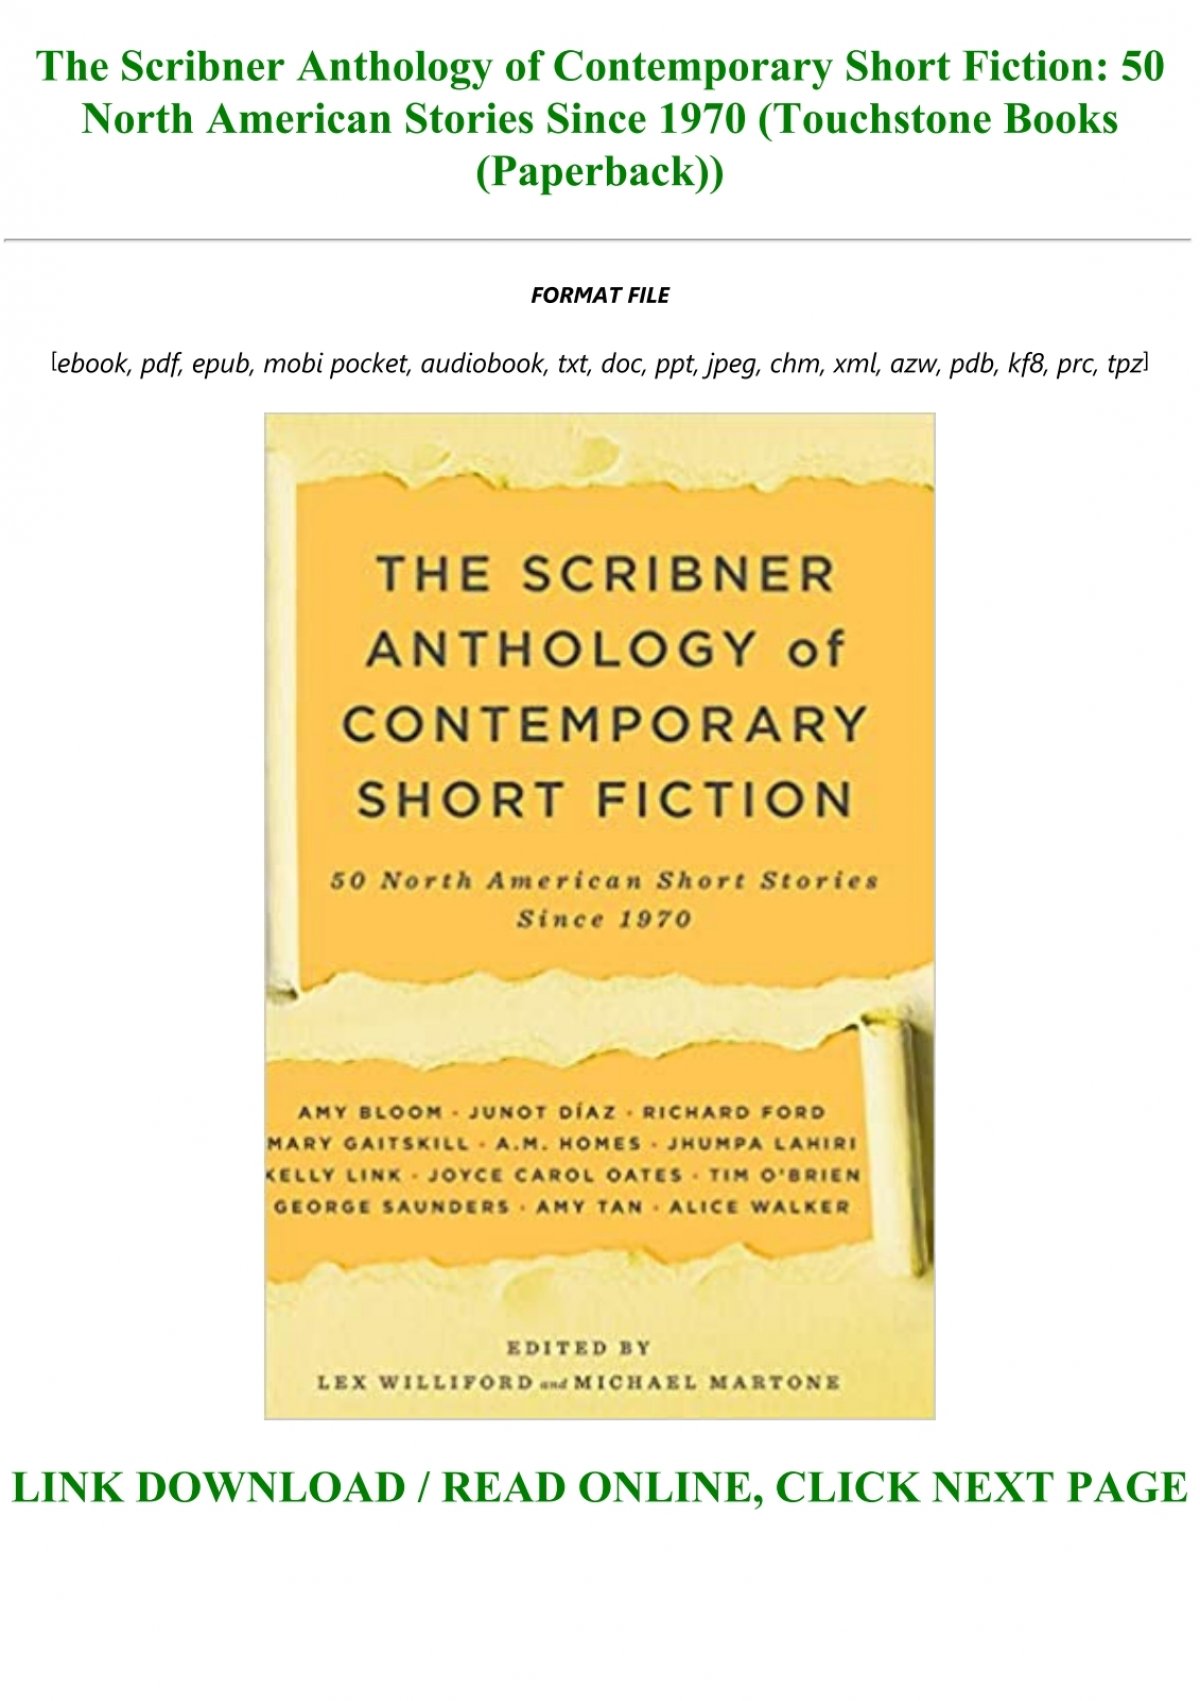 The Scribner Anthology of Contemporary Short Fiction: 50 North American  Stories Since 1970 (Touchstone Books (Paperback))